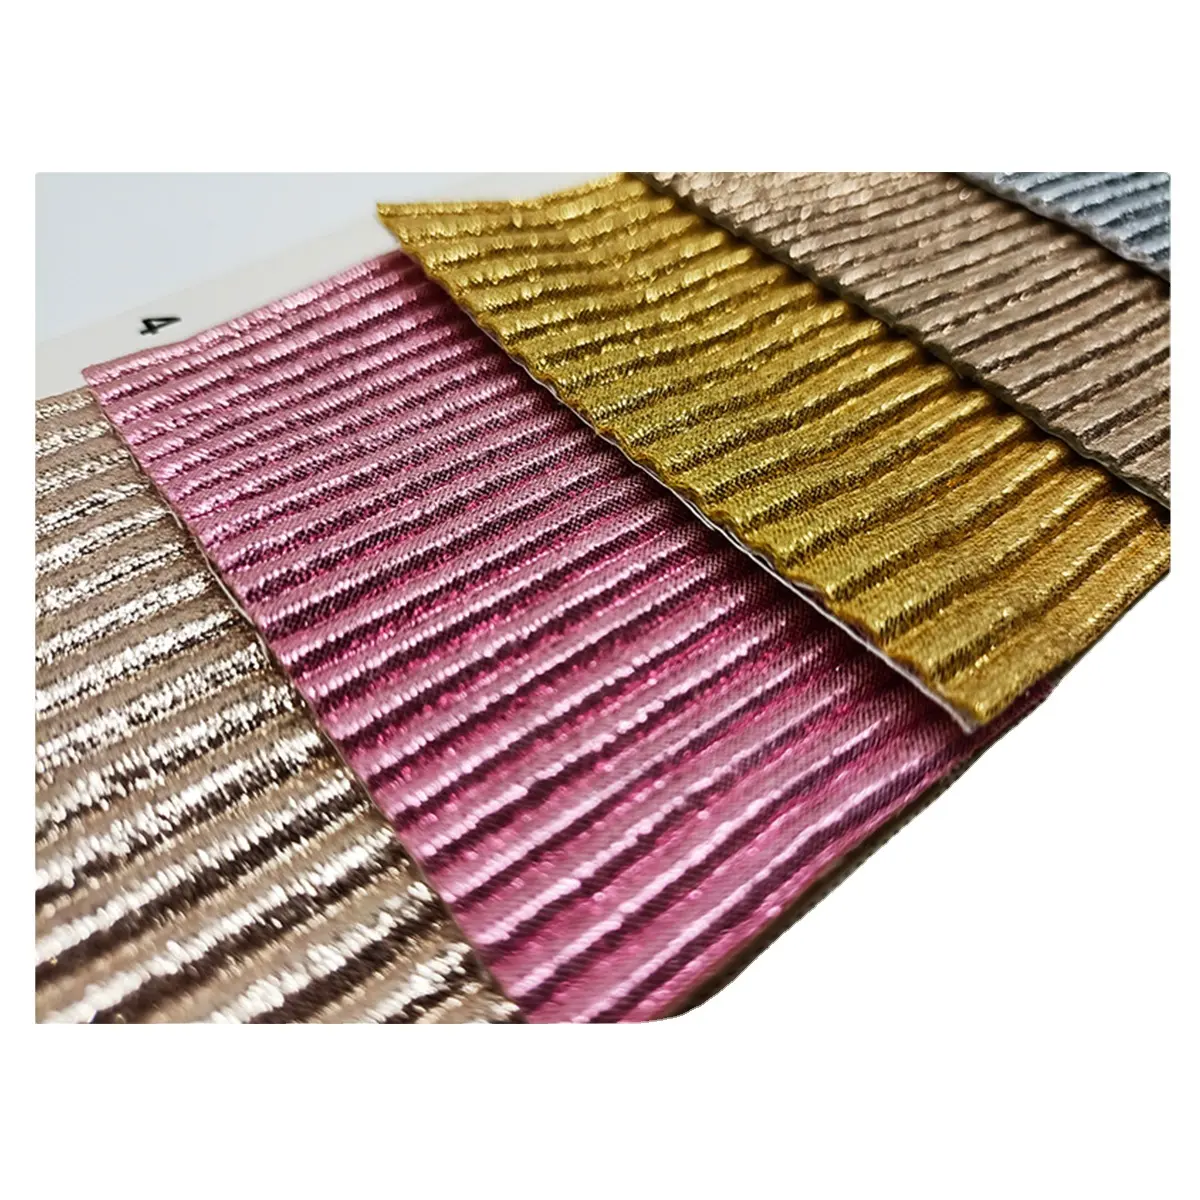 Fashion Shiny Stylish Fold 100% Polyester Knitted Fabric glitter for shoes bags clothing decoration